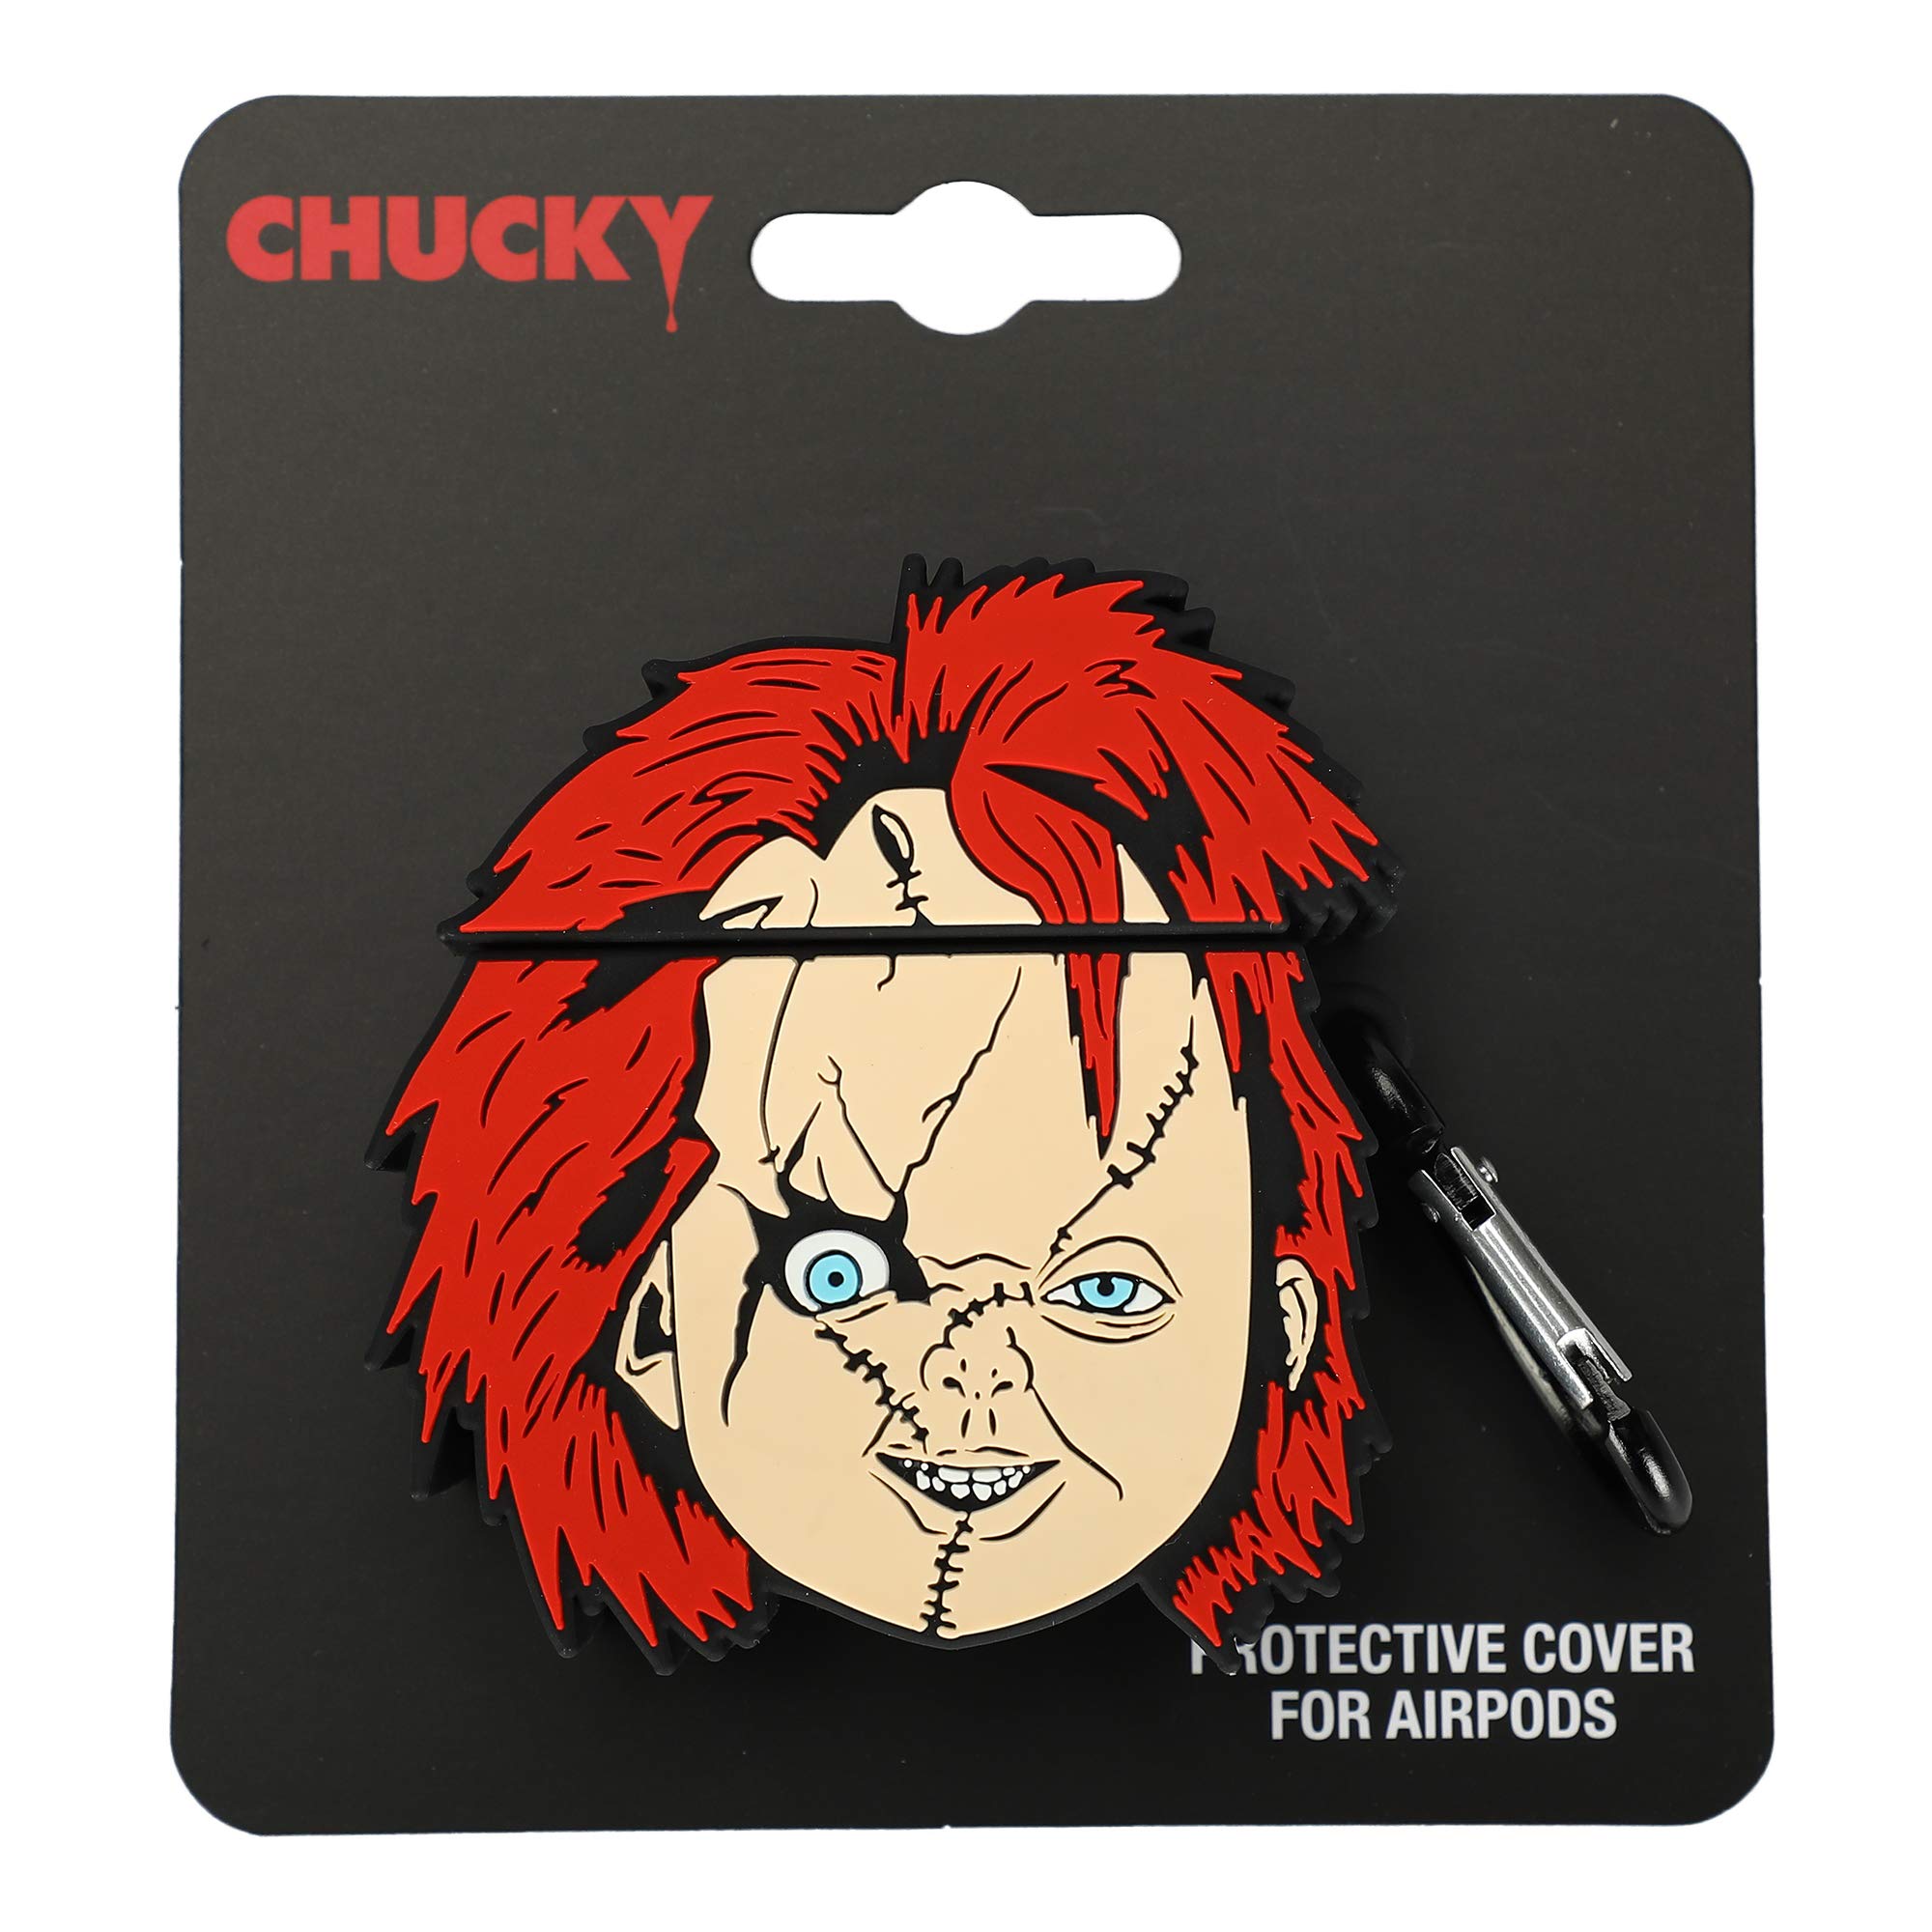 Chucky Child's Play Molded Airpod Case